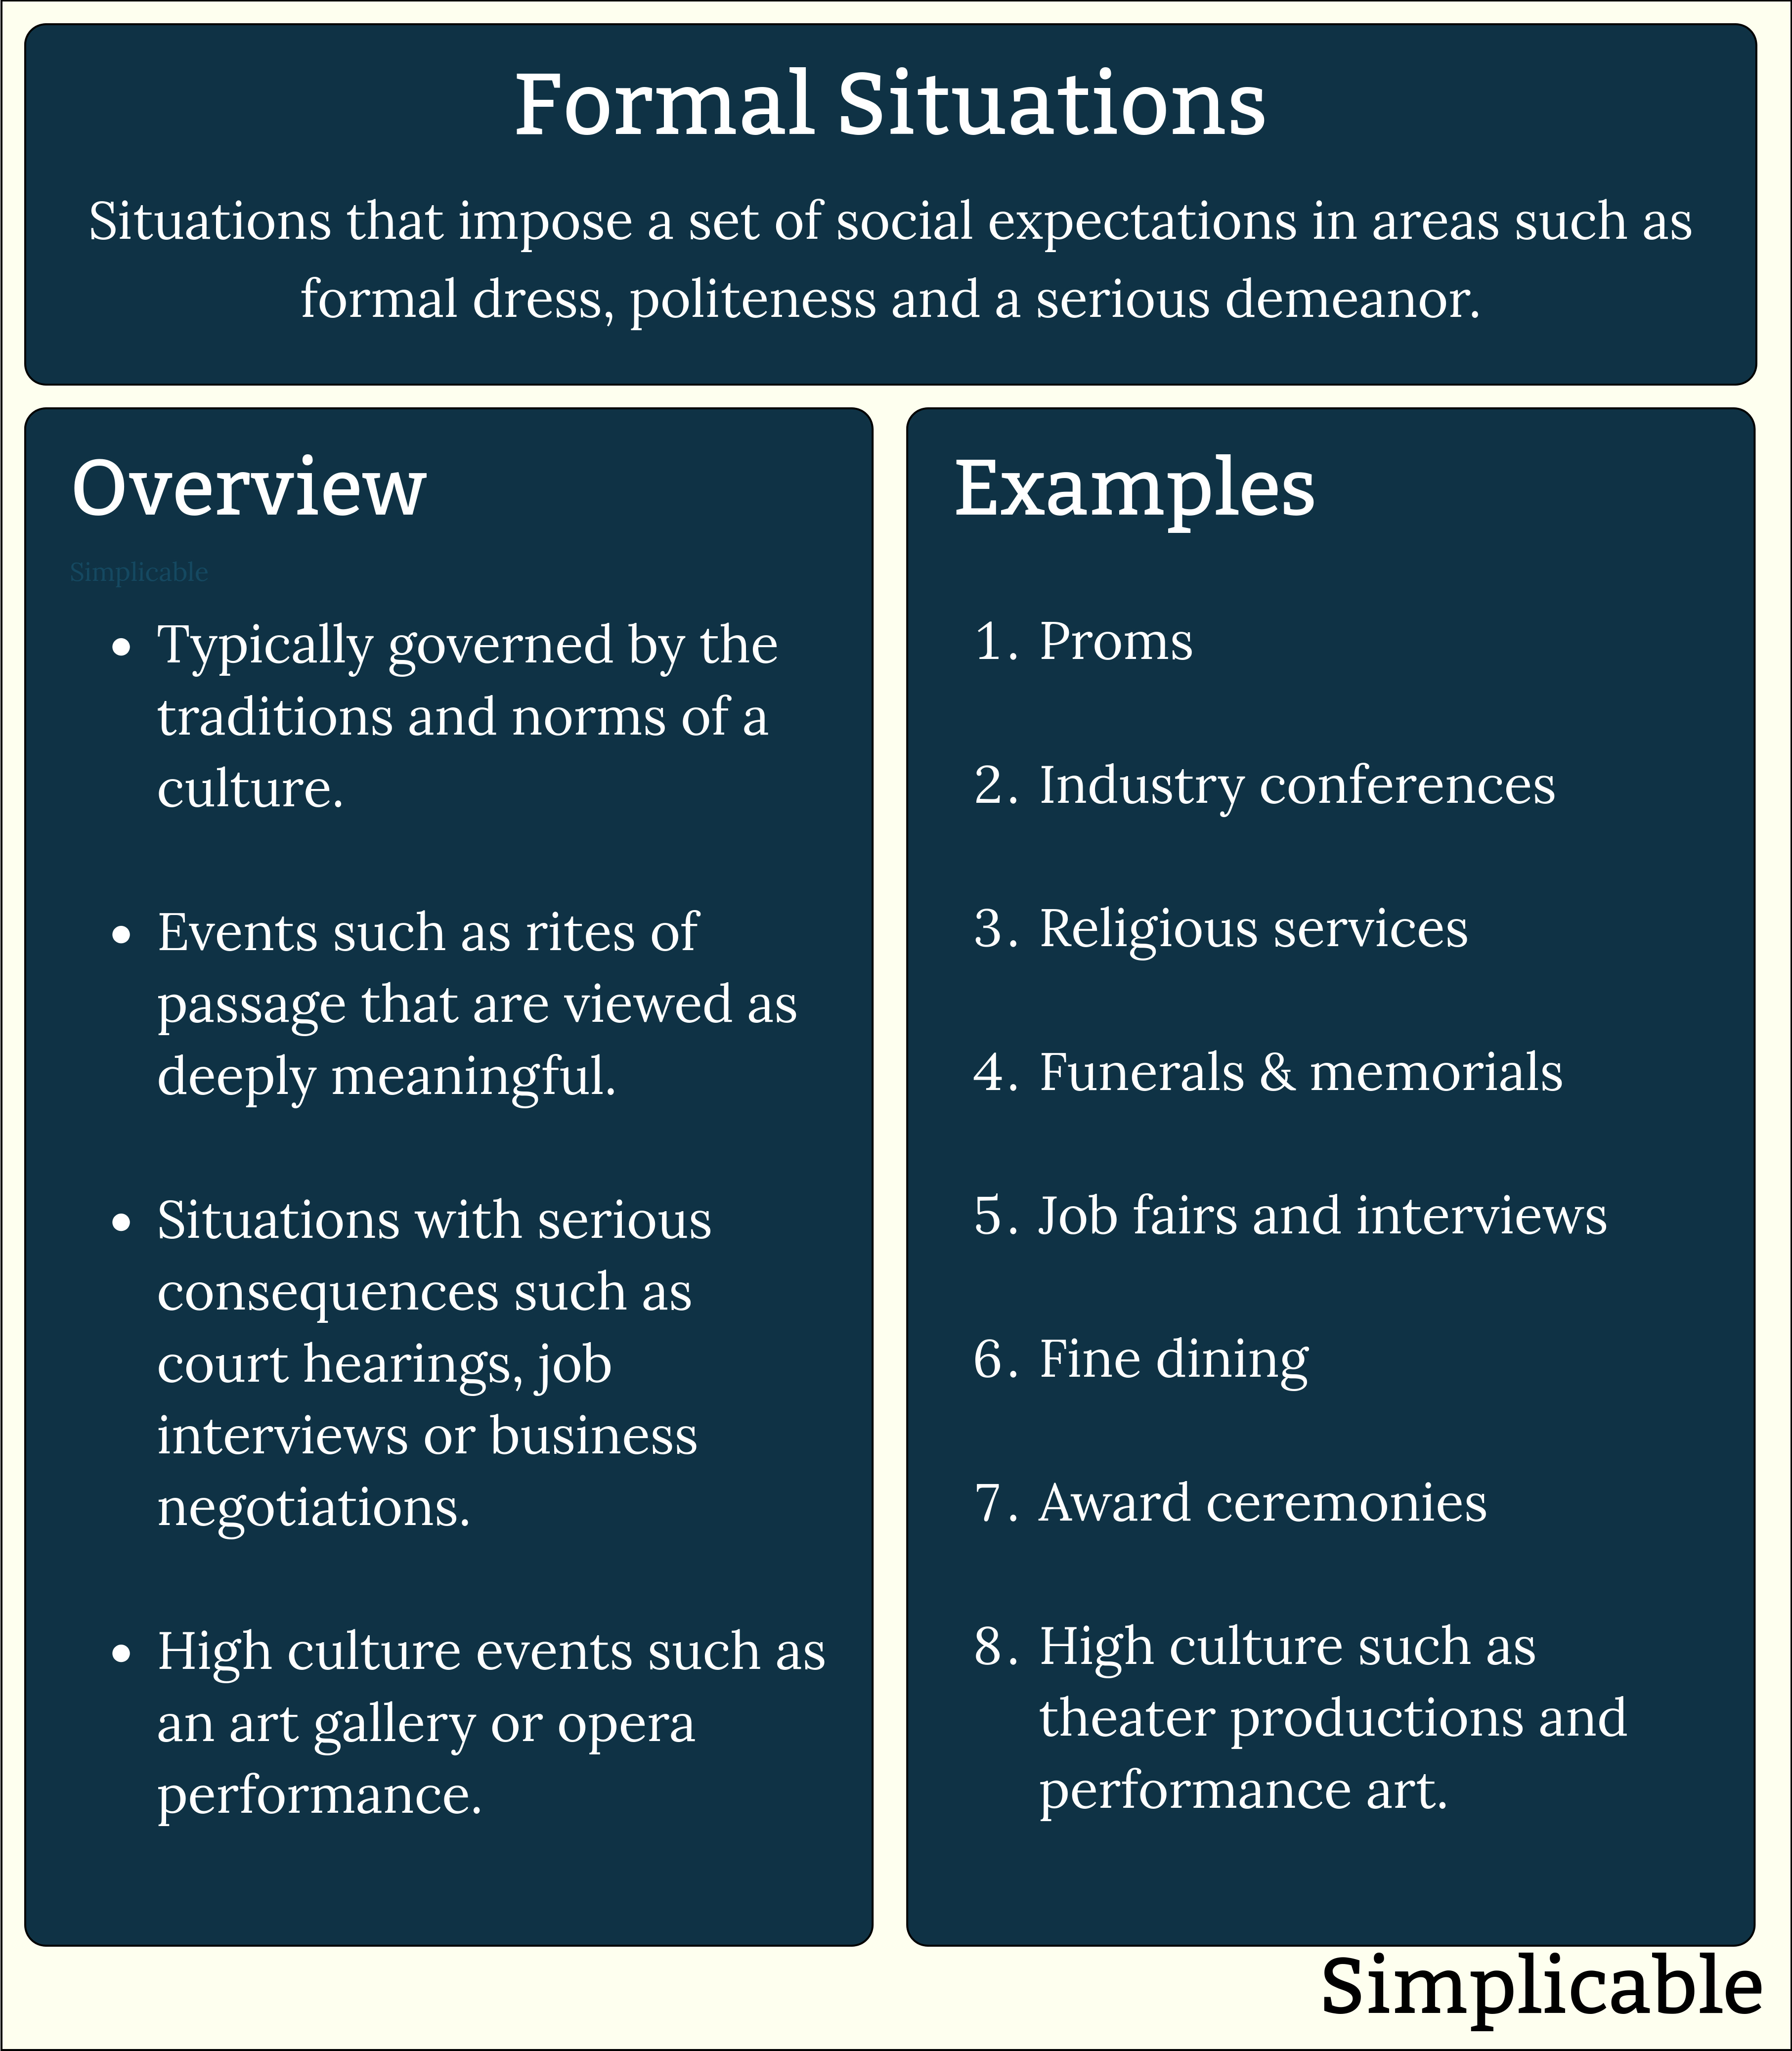 formal situations overview and examples